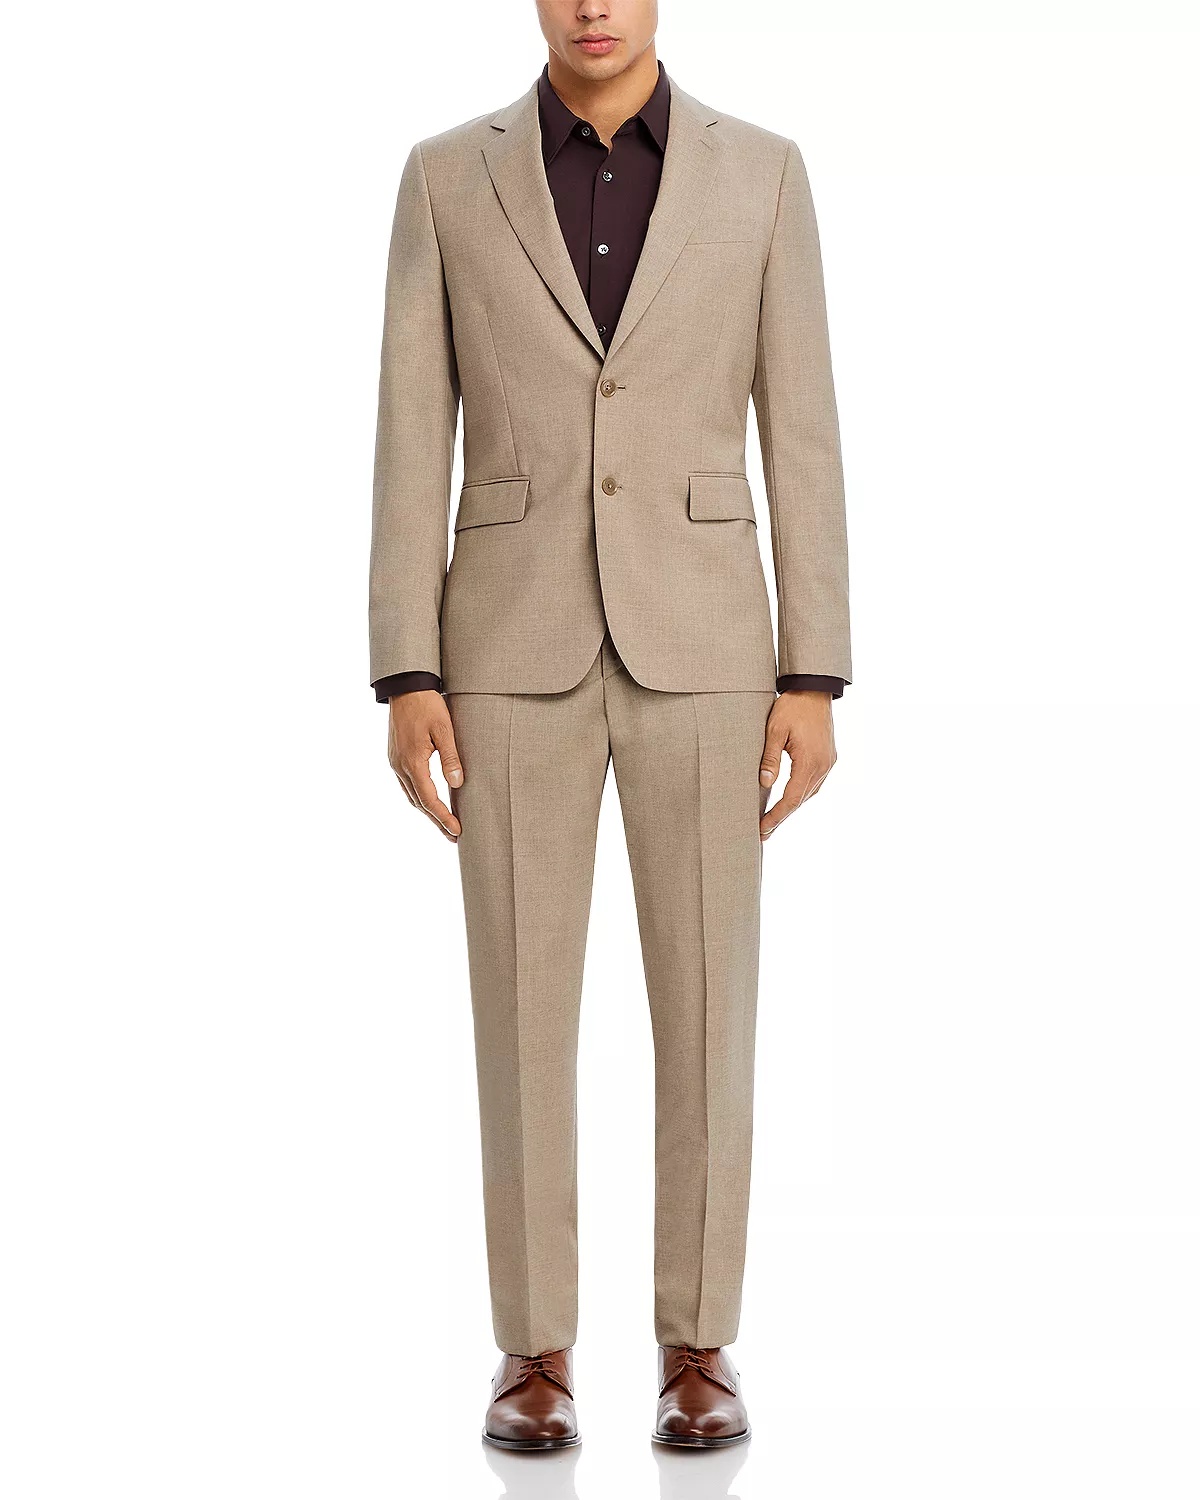 Brierly Tailored Fit Suit - 3